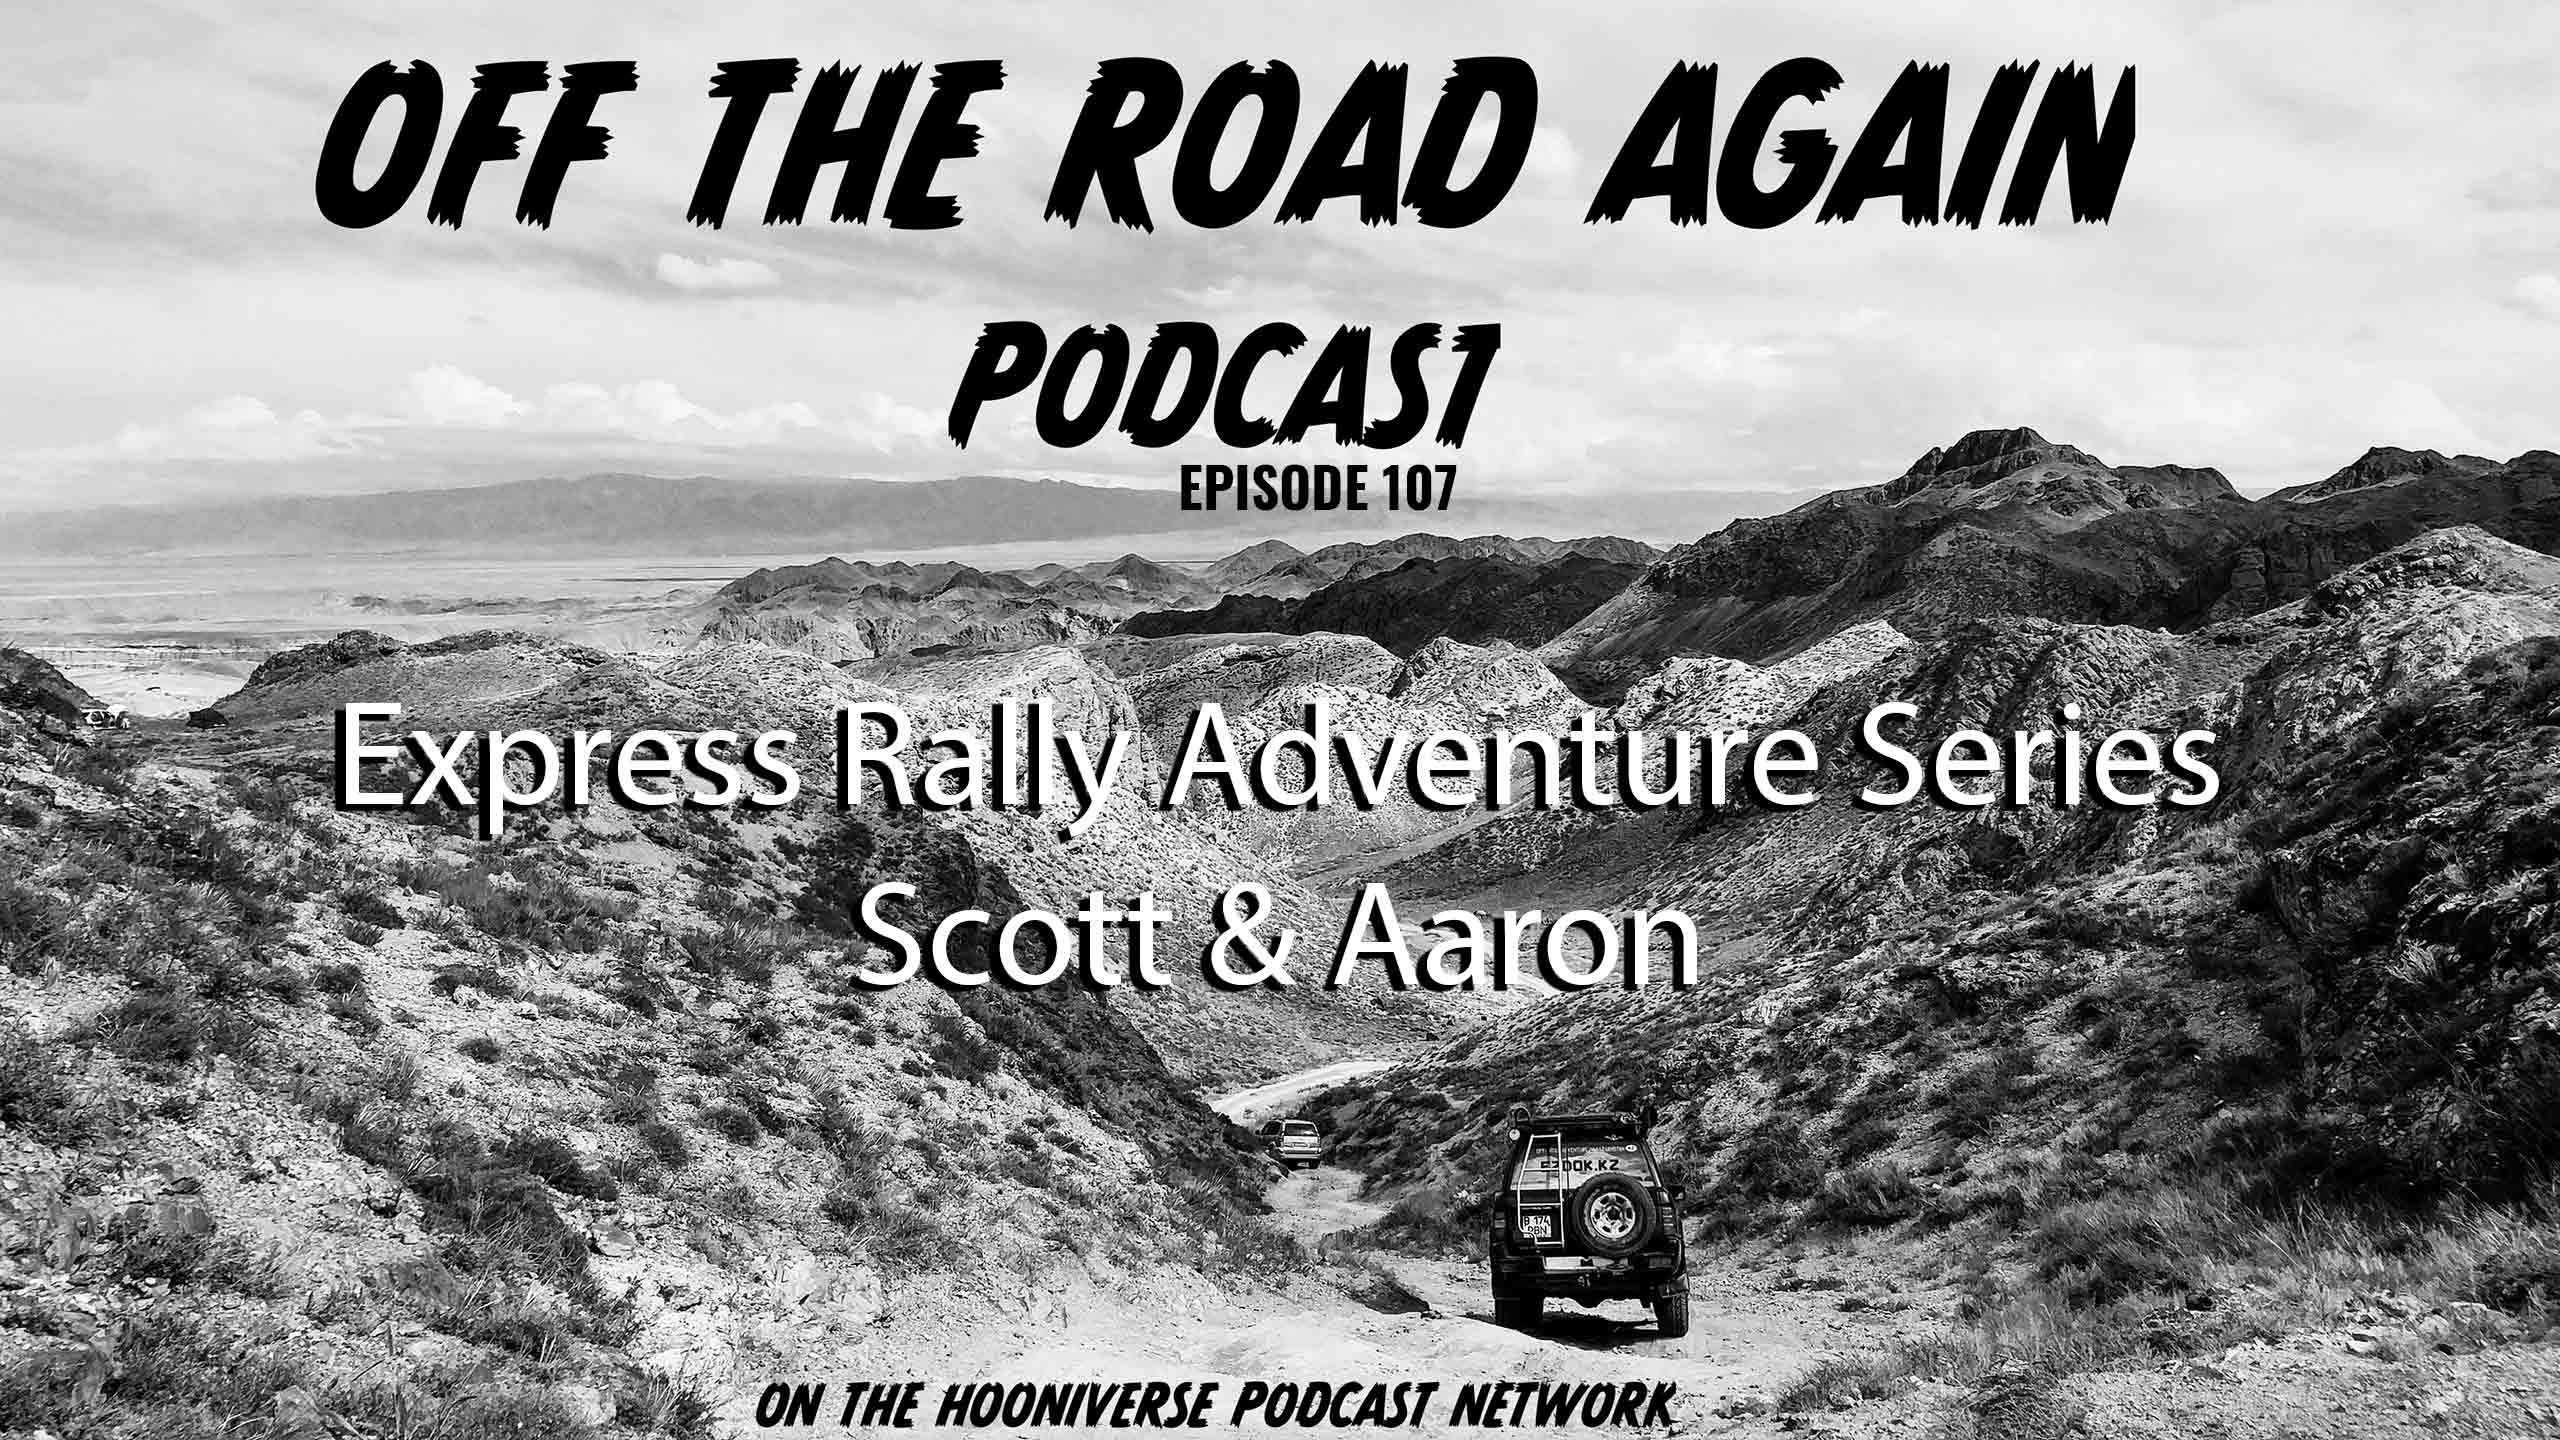 Express-Rally-Advenutre-Series-Scott-Aaron-Off-The-Road-Again-Episode-107